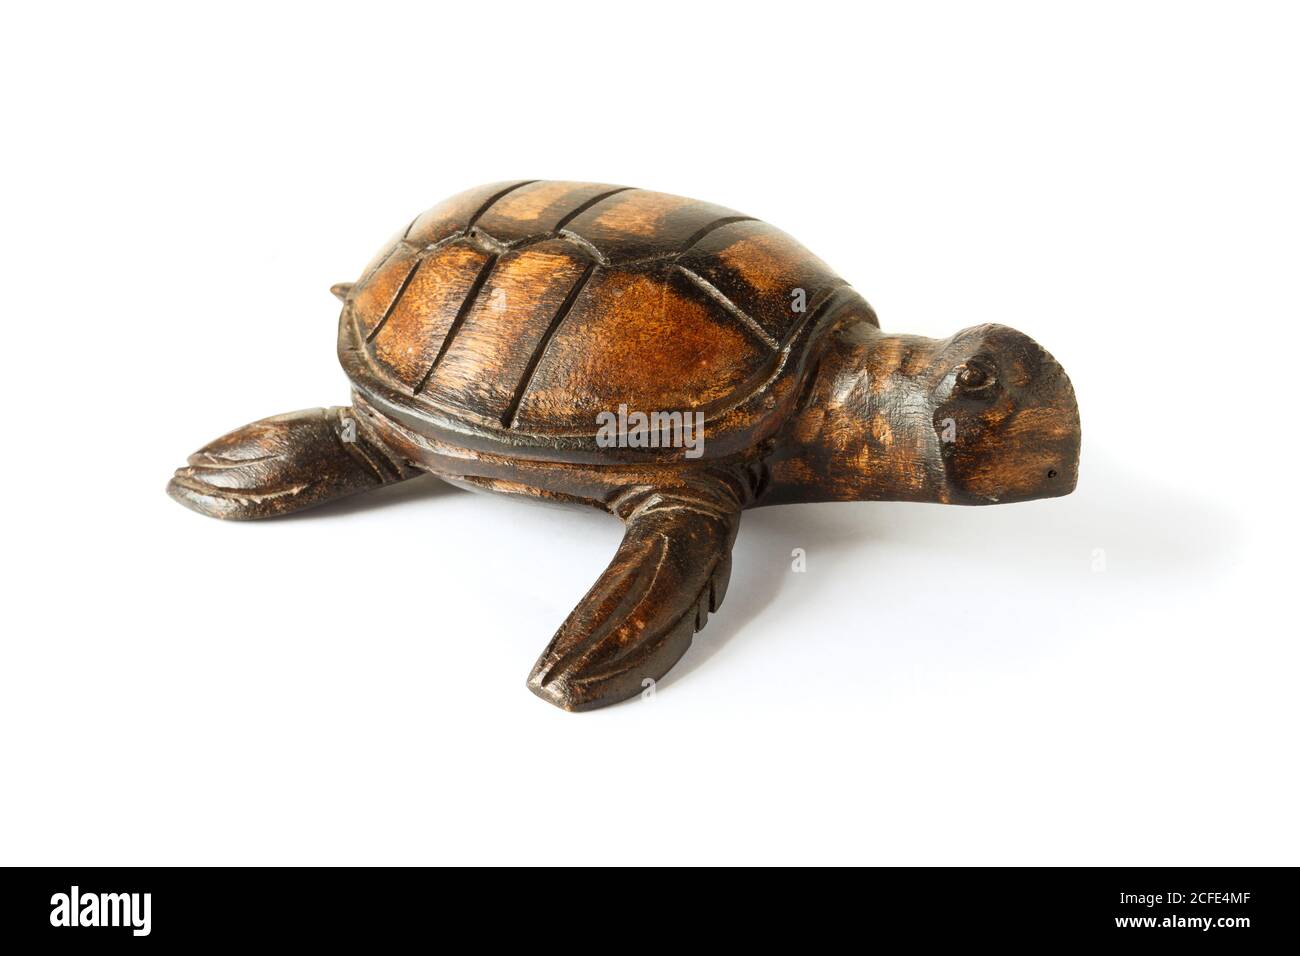 Wooden figurine of a sea turtle isolated on a white background. Stock Photo